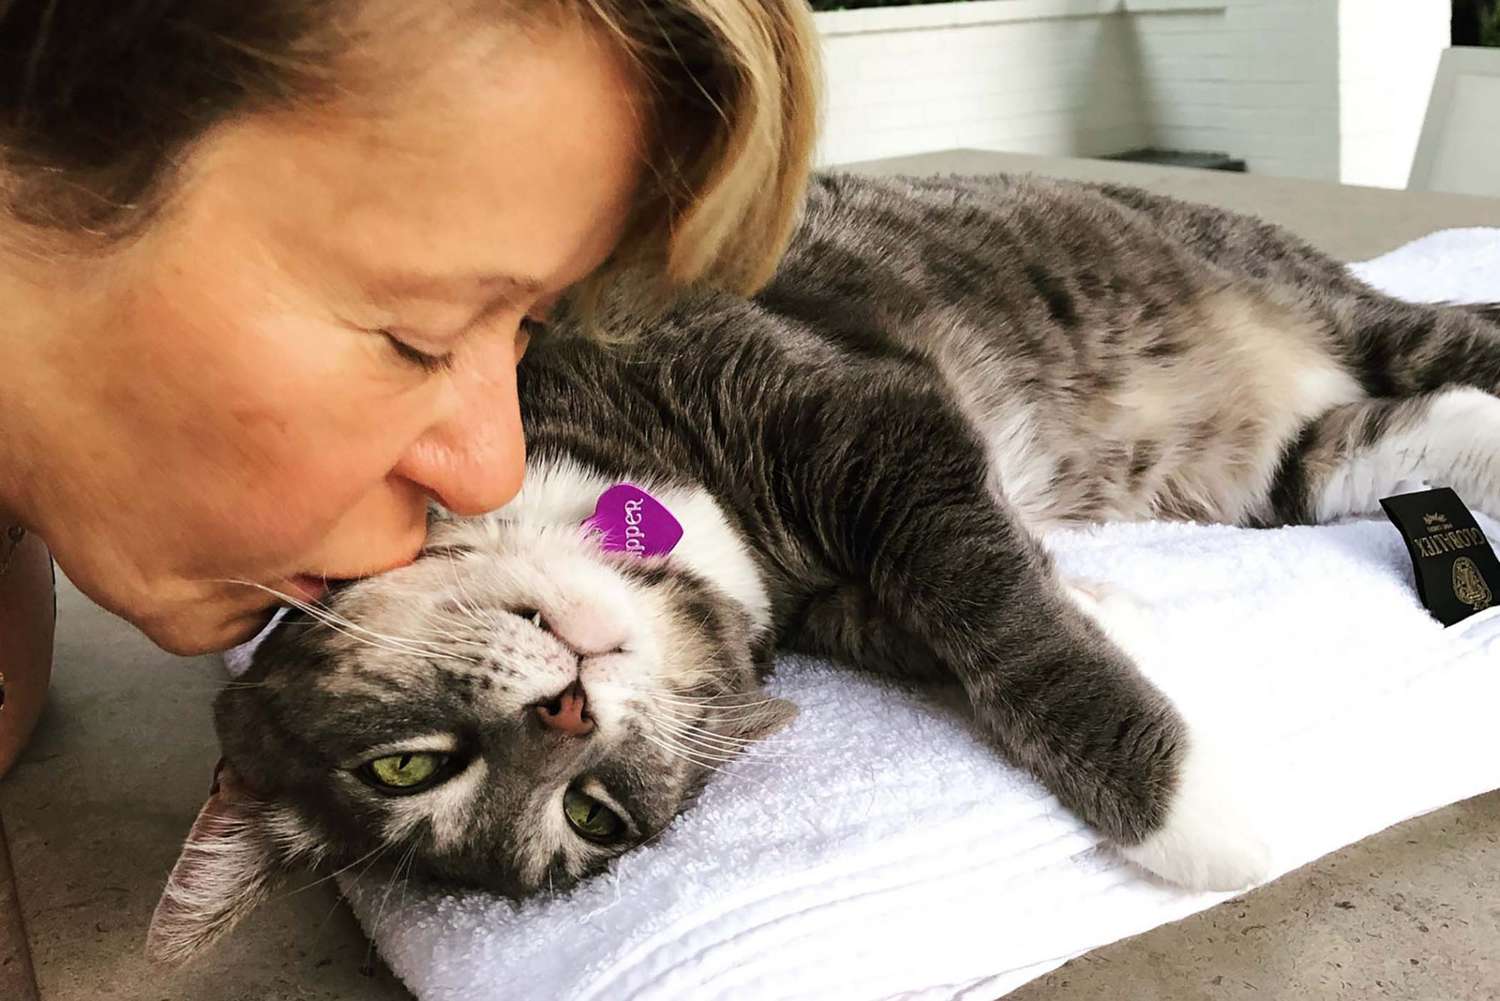 Voice actor Yeardley Smith kisses cat on face